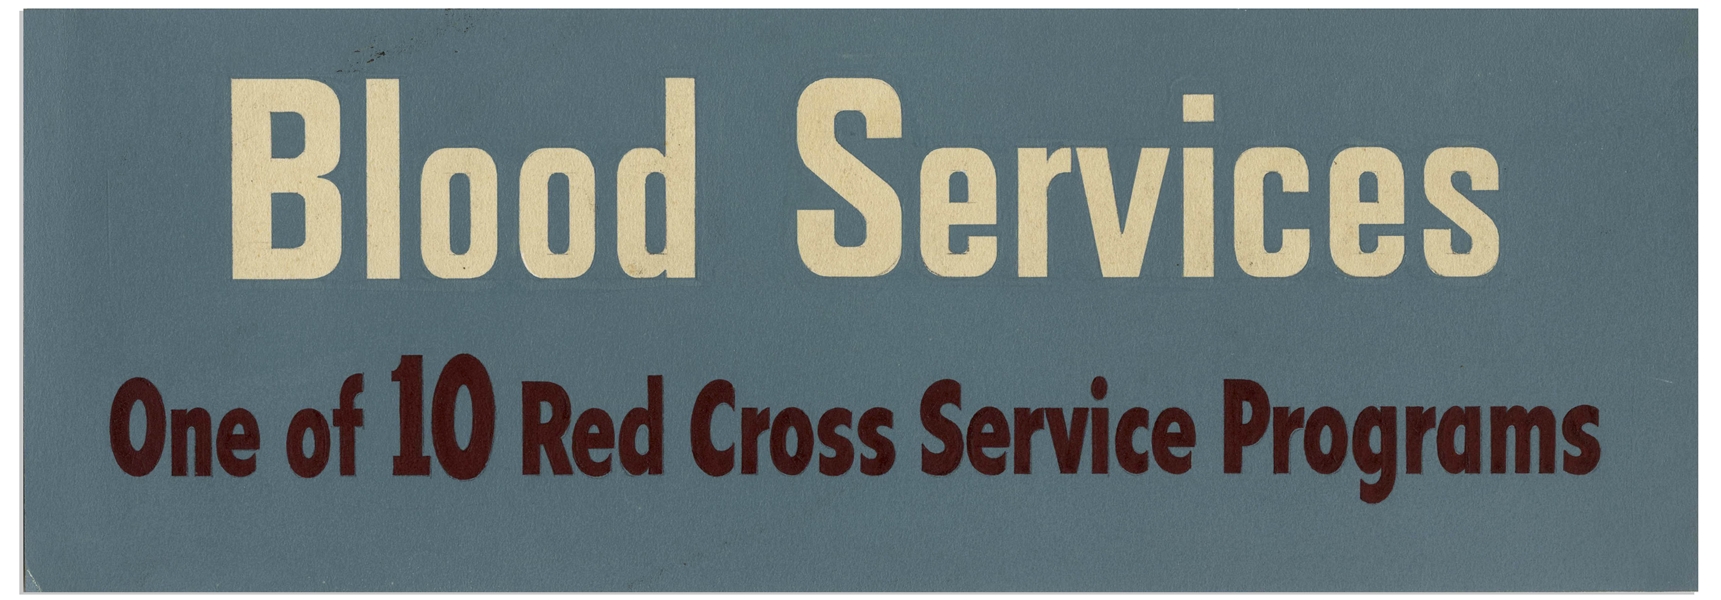 Original Art from the Red Cross for Their ''Blood Services'' Program